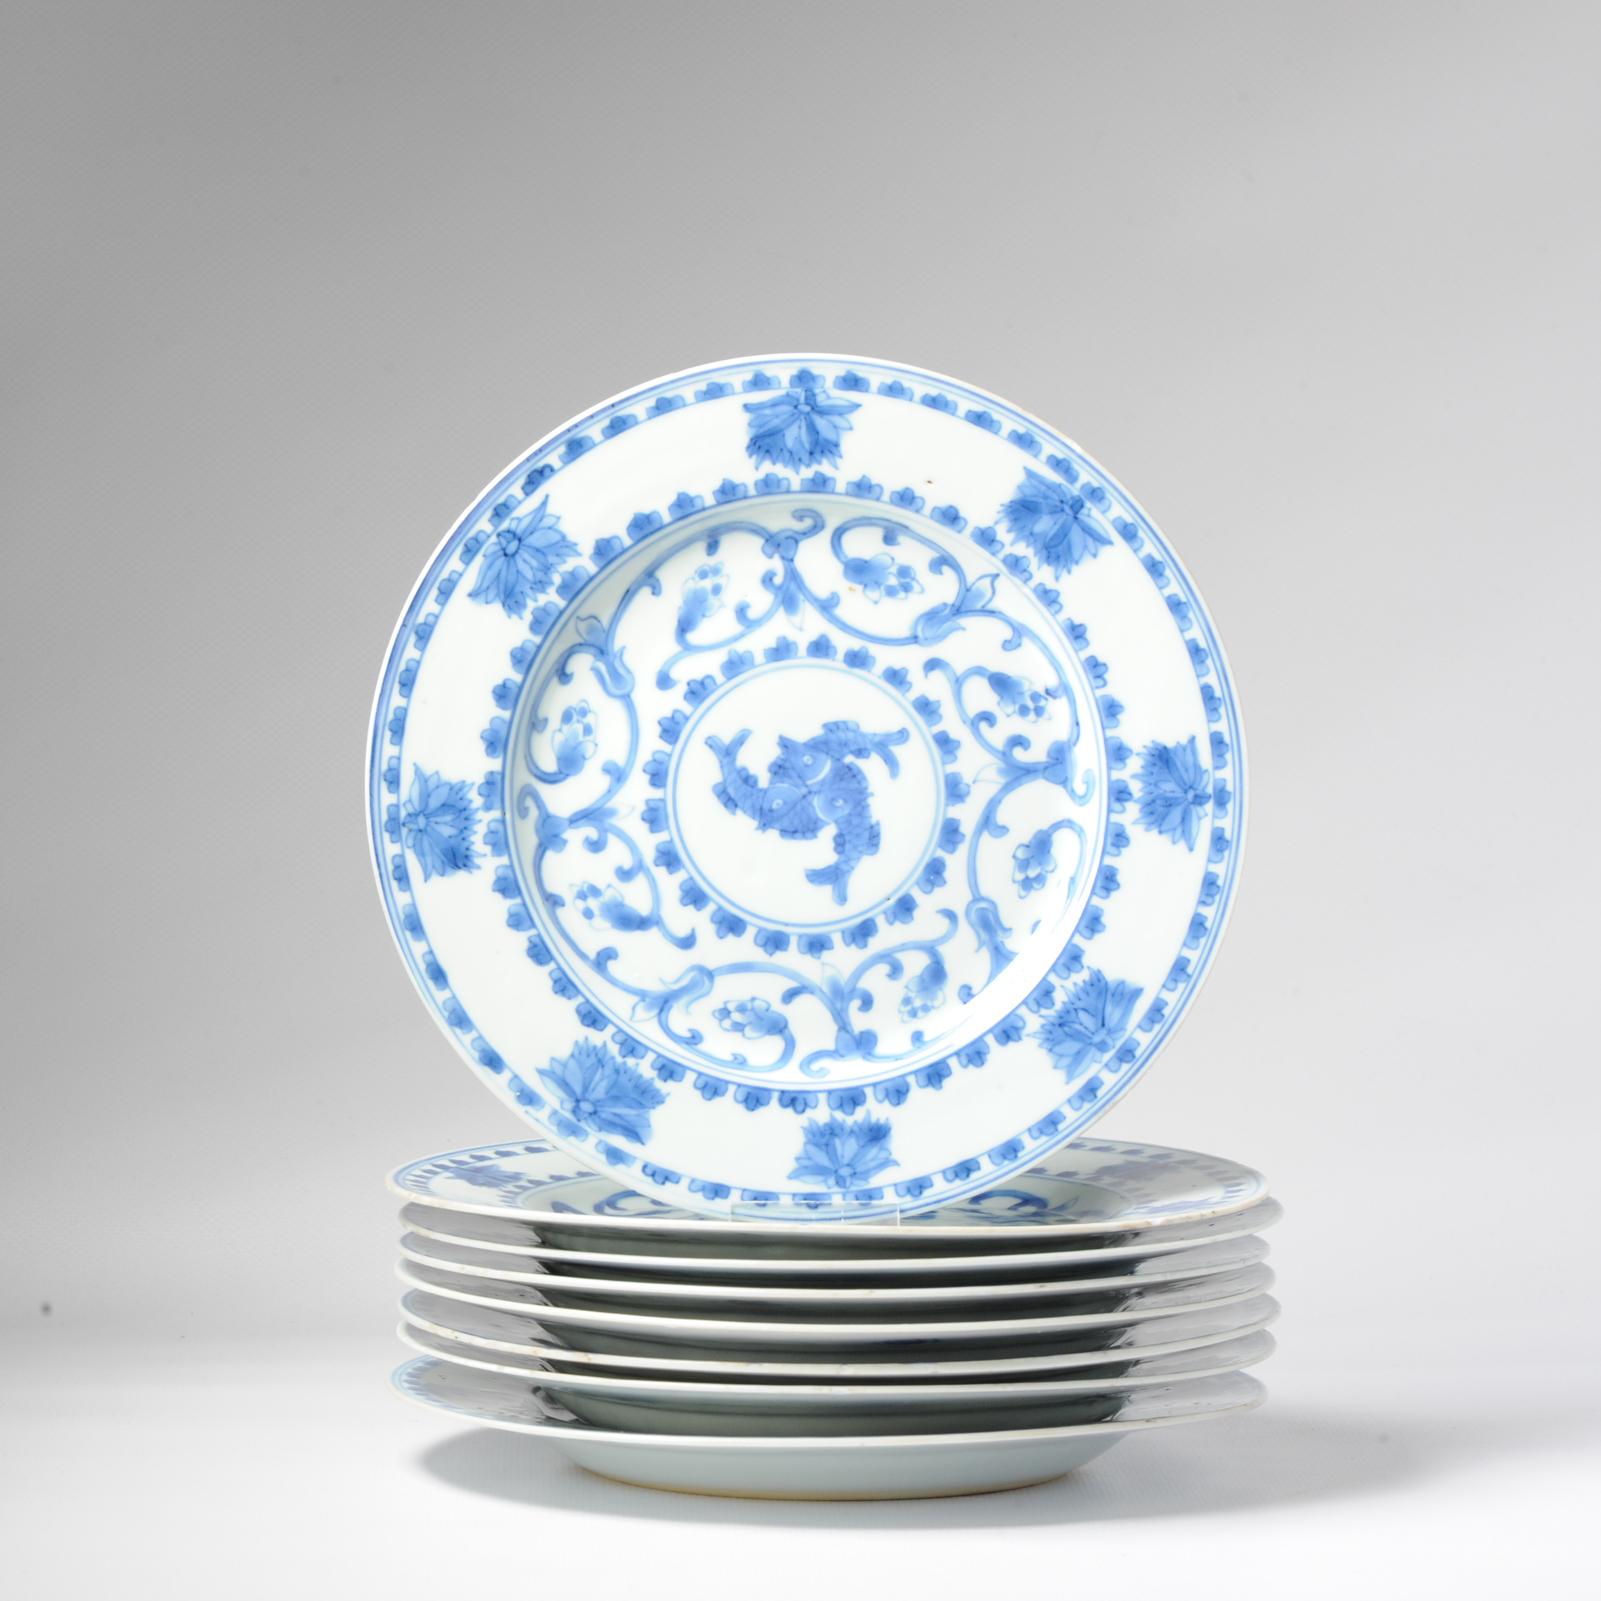 18th Century and Earlier #8 Antique Chinese Porcelain 18th C Kangxi/Yongzheng Period Blue White Dinner For Sale